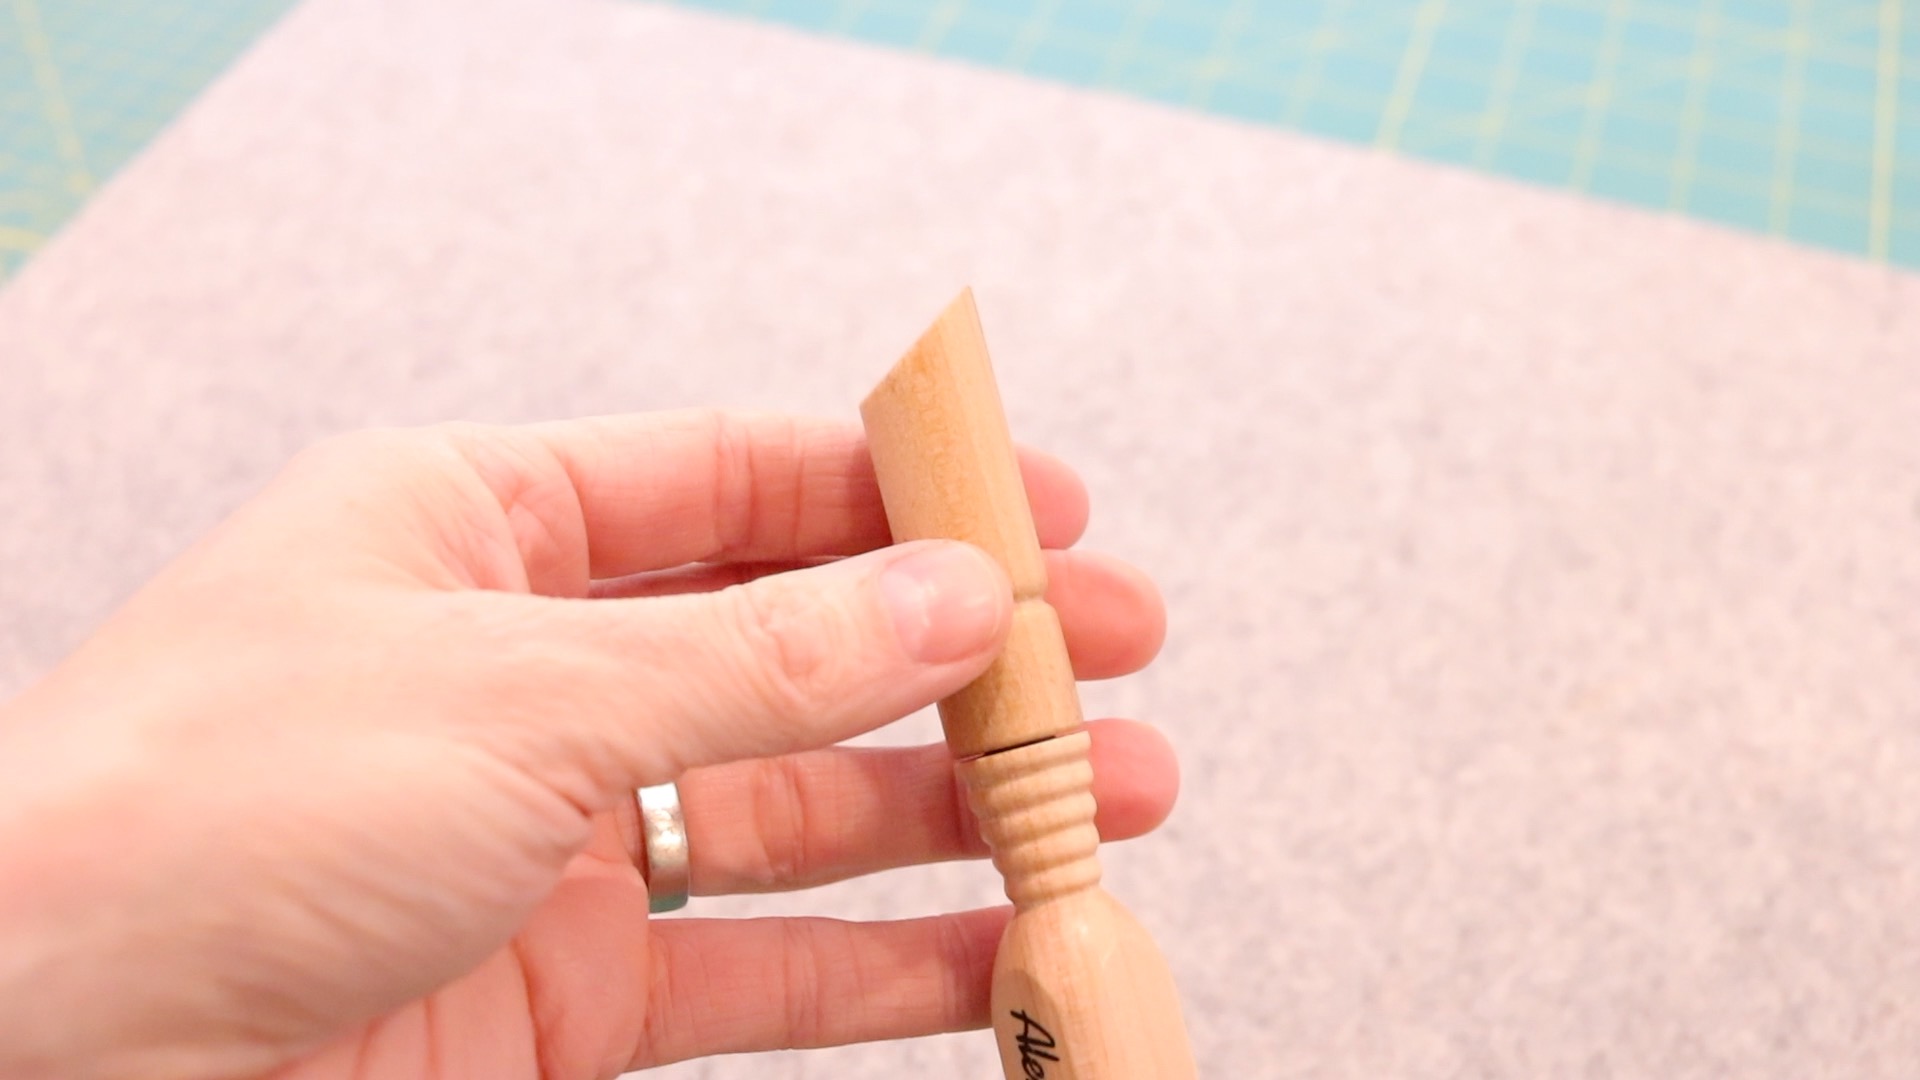 The pressing end of a wooden 4-in-1 sewing tool. 